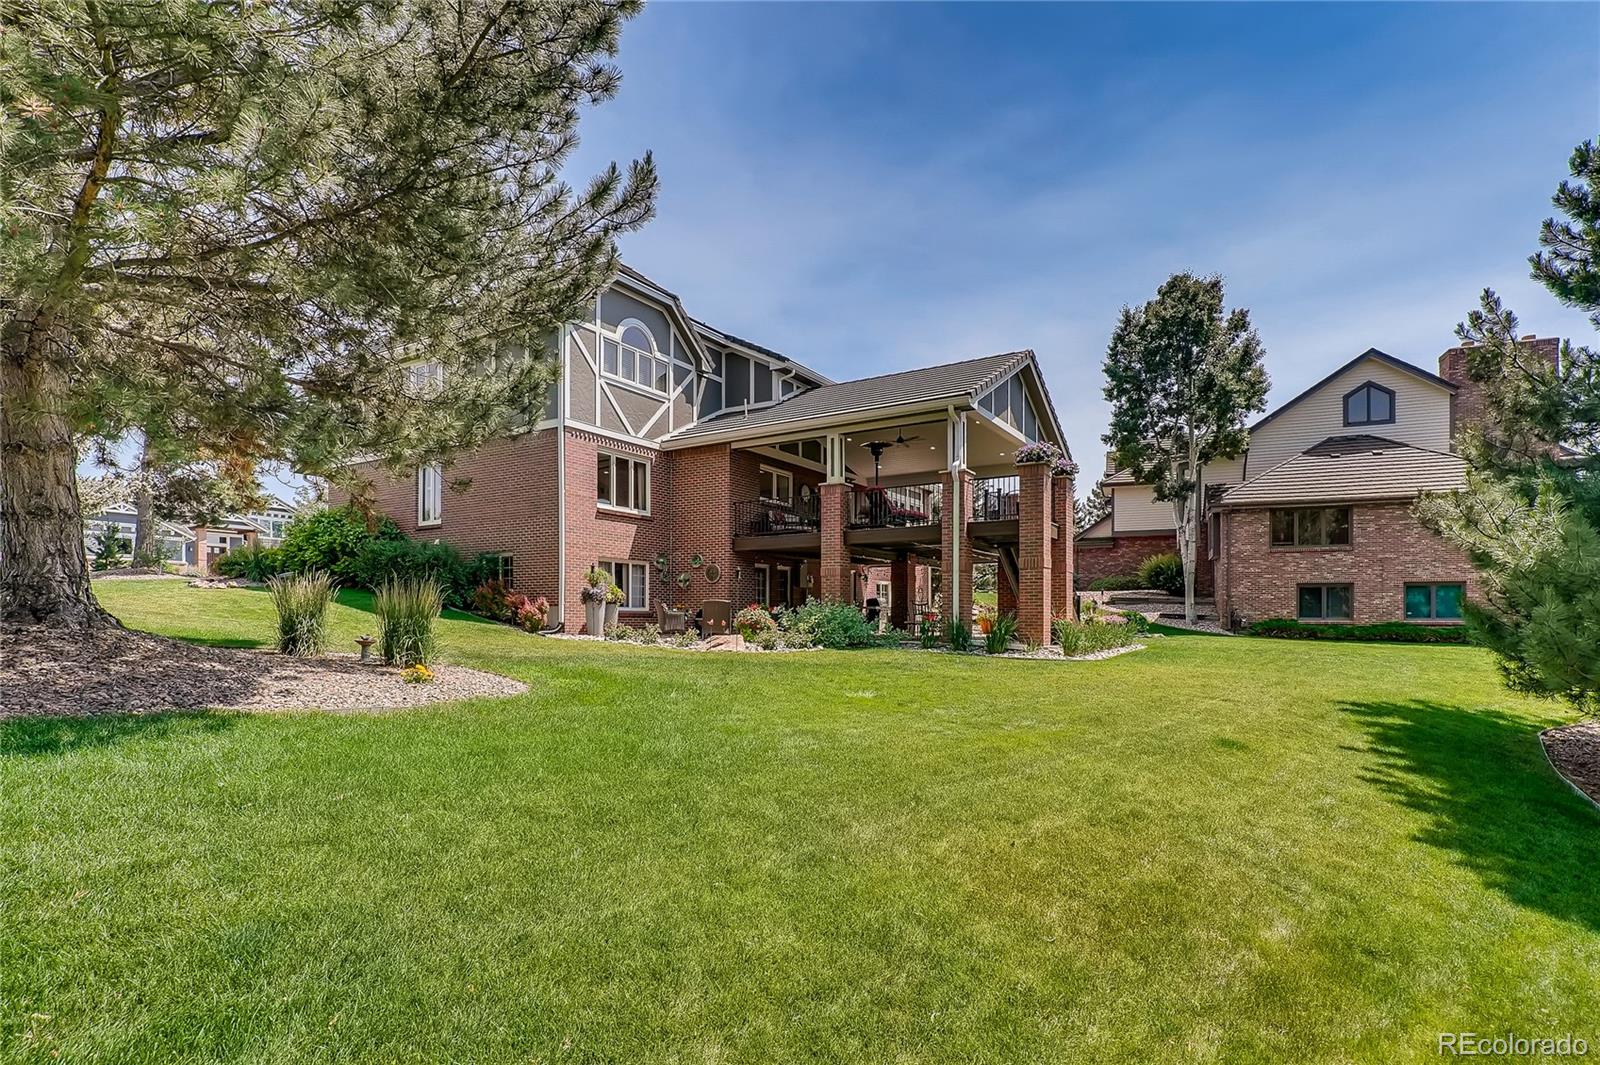 2196 116th, Westminster, CO